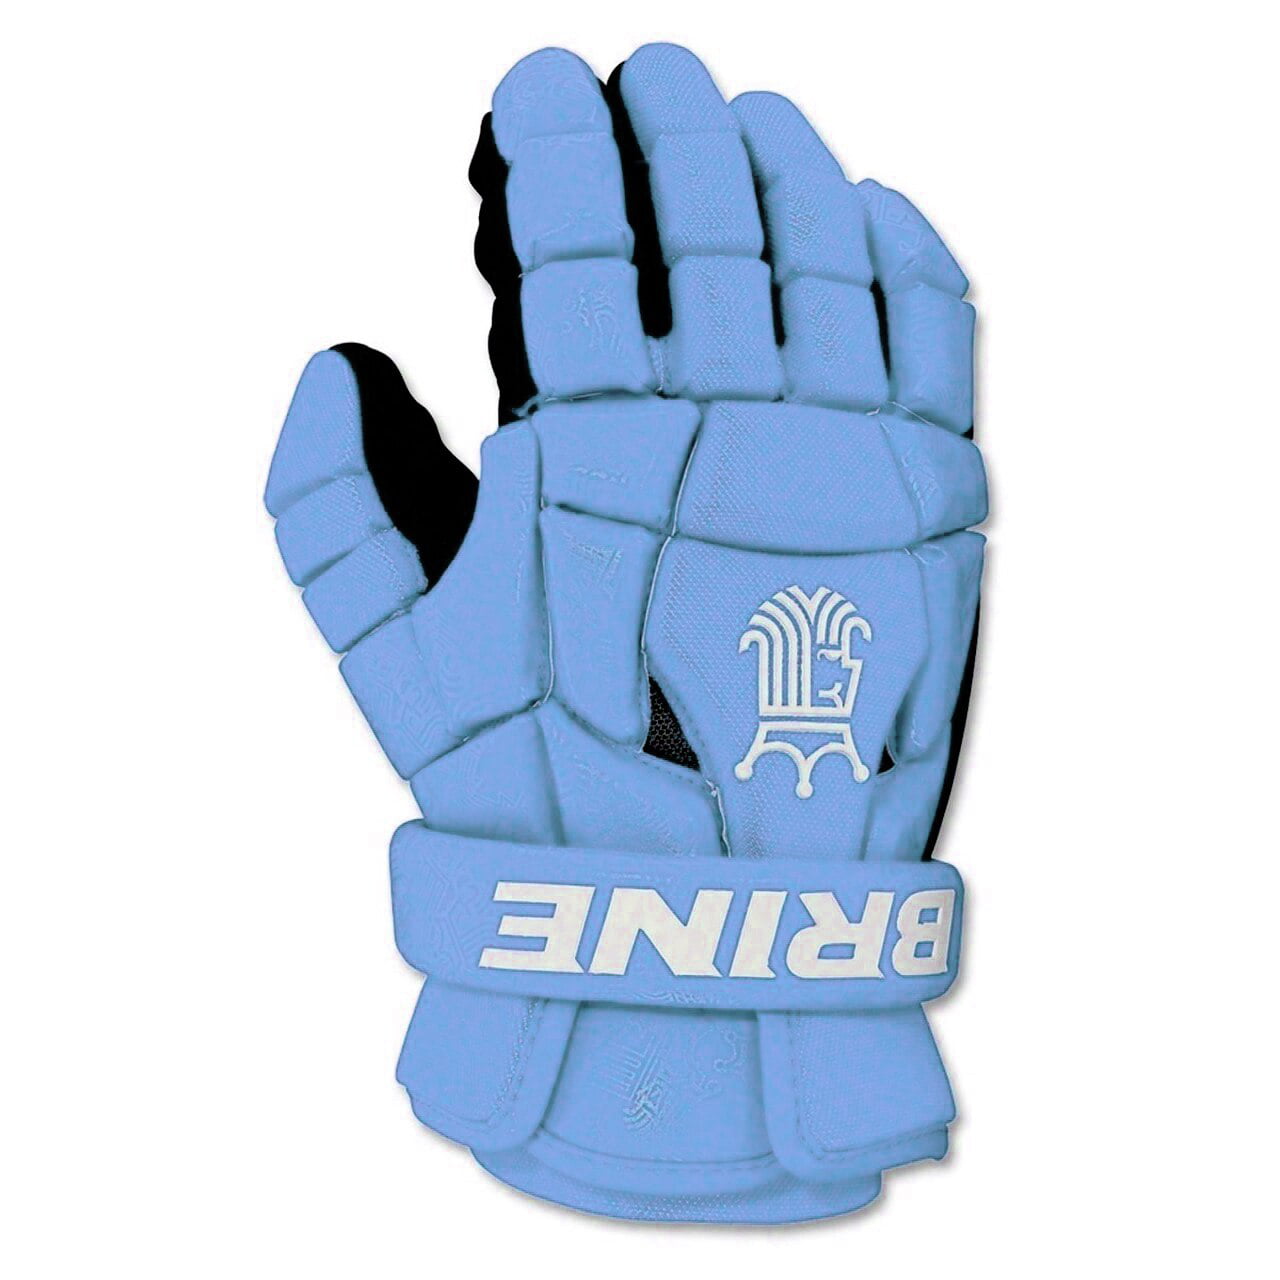 NEW Various Colors Brine King Superlight 2 Lacrosse Gloves Lists @ $110 